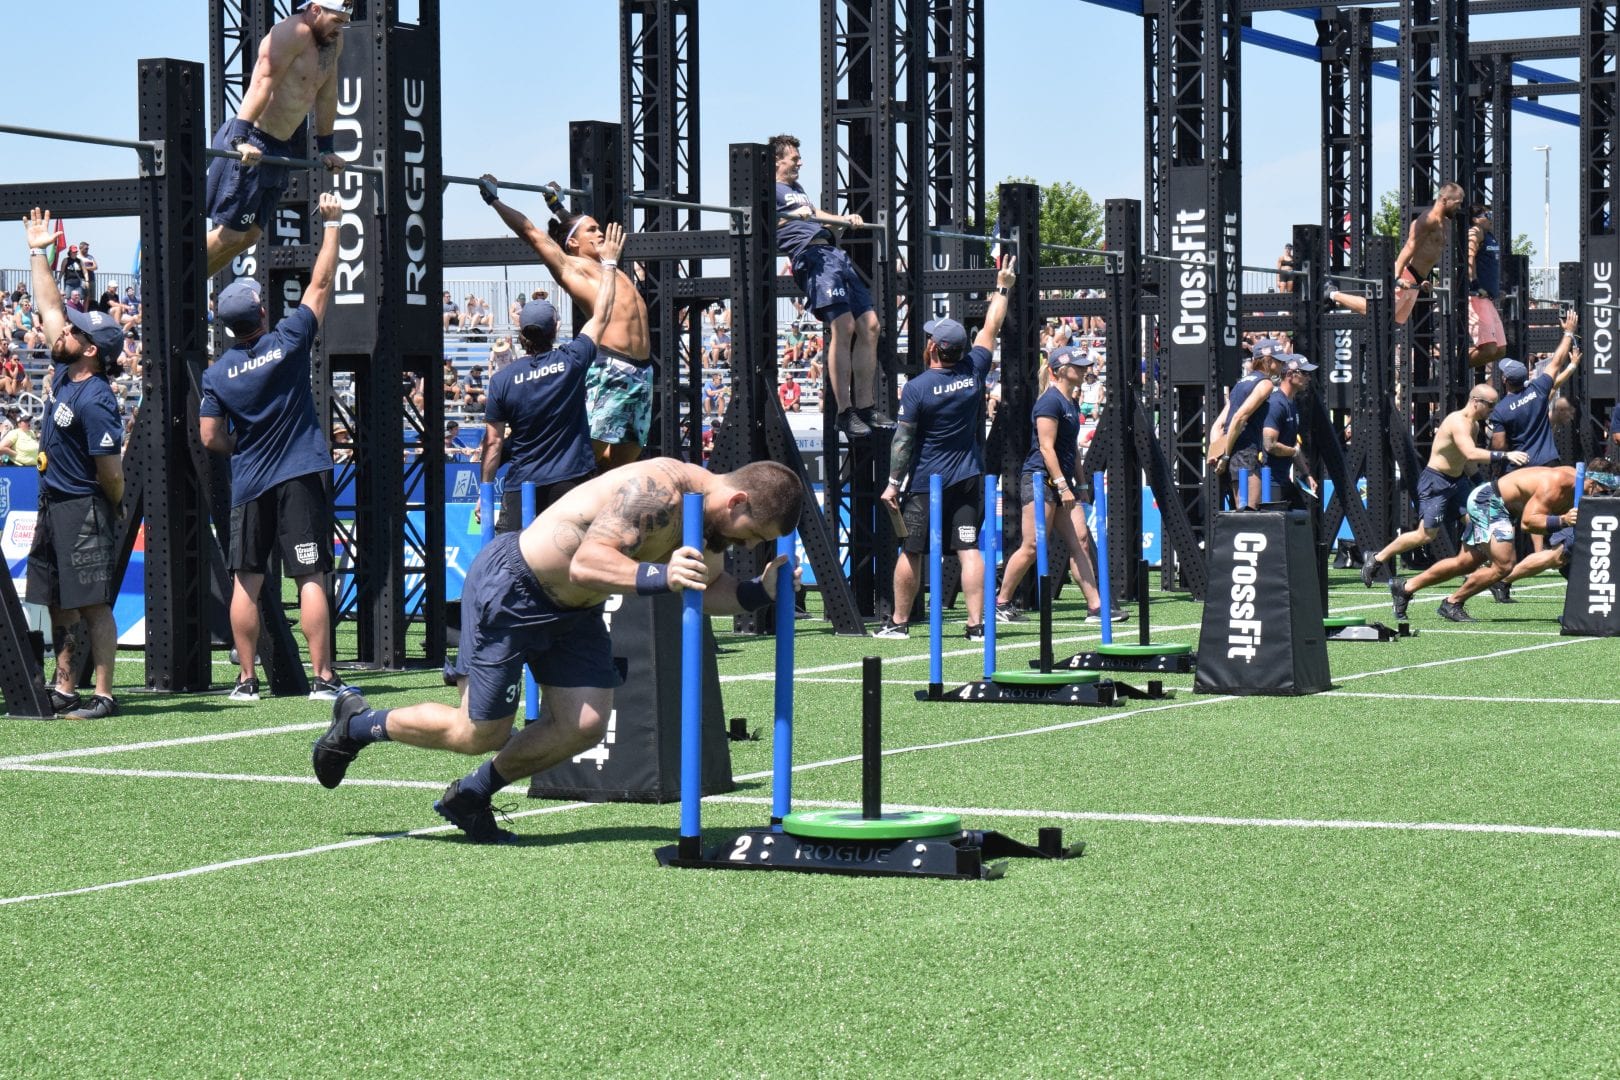 Matt Mcleod completes the Sprint Bicouplet event at the 2019 CrossFit Games